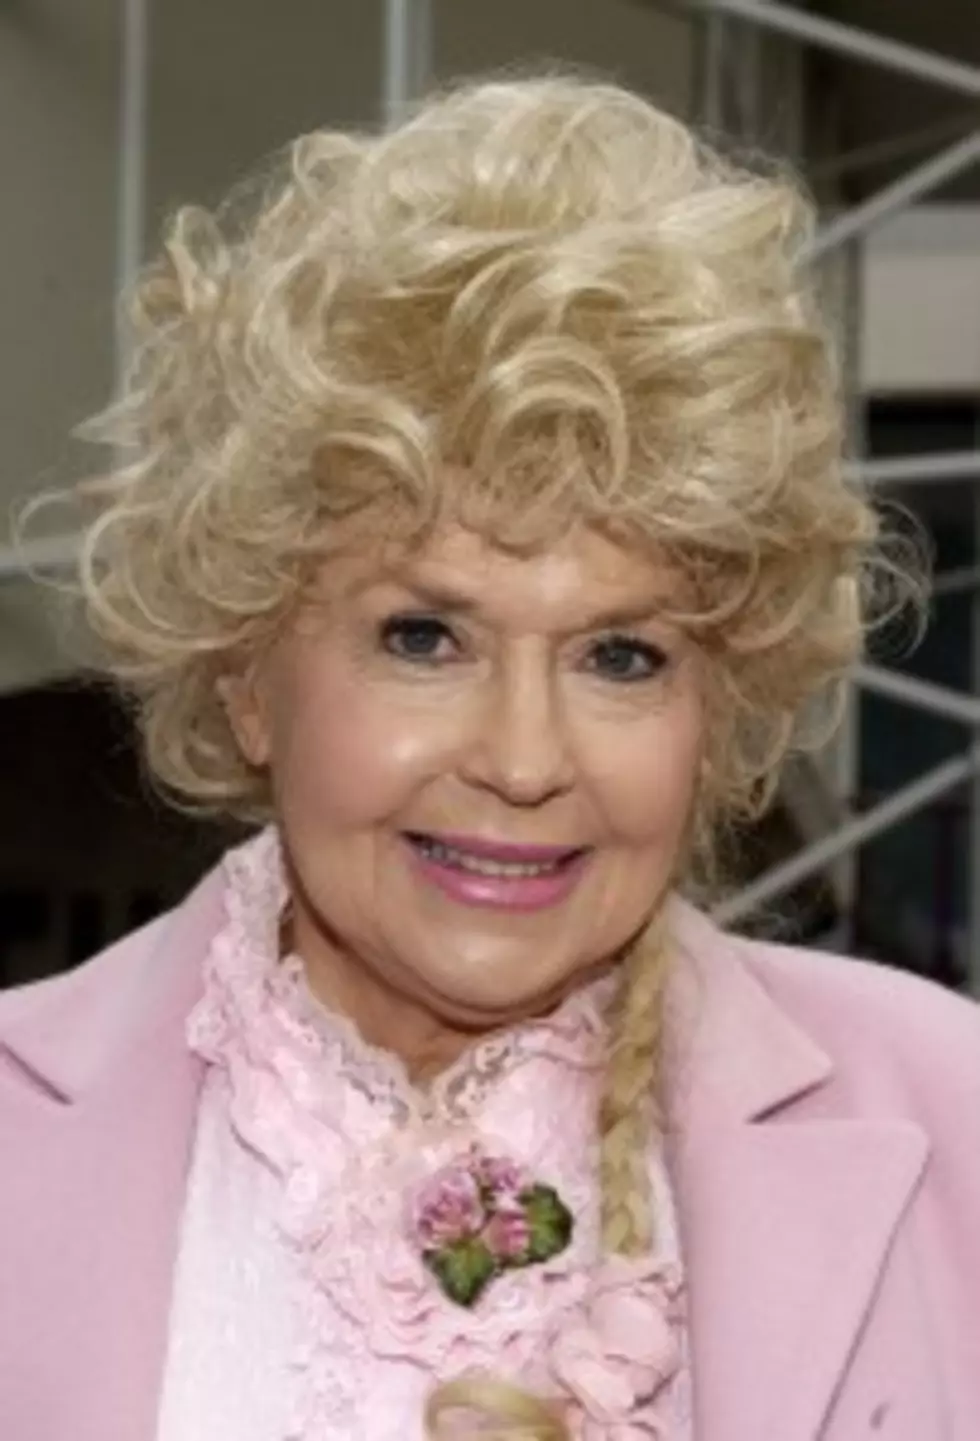 Donna Douglas &#8211; Elly May Clampett on &#8216;The Beverly Hillbillies&#8217; &#8211; Has Died